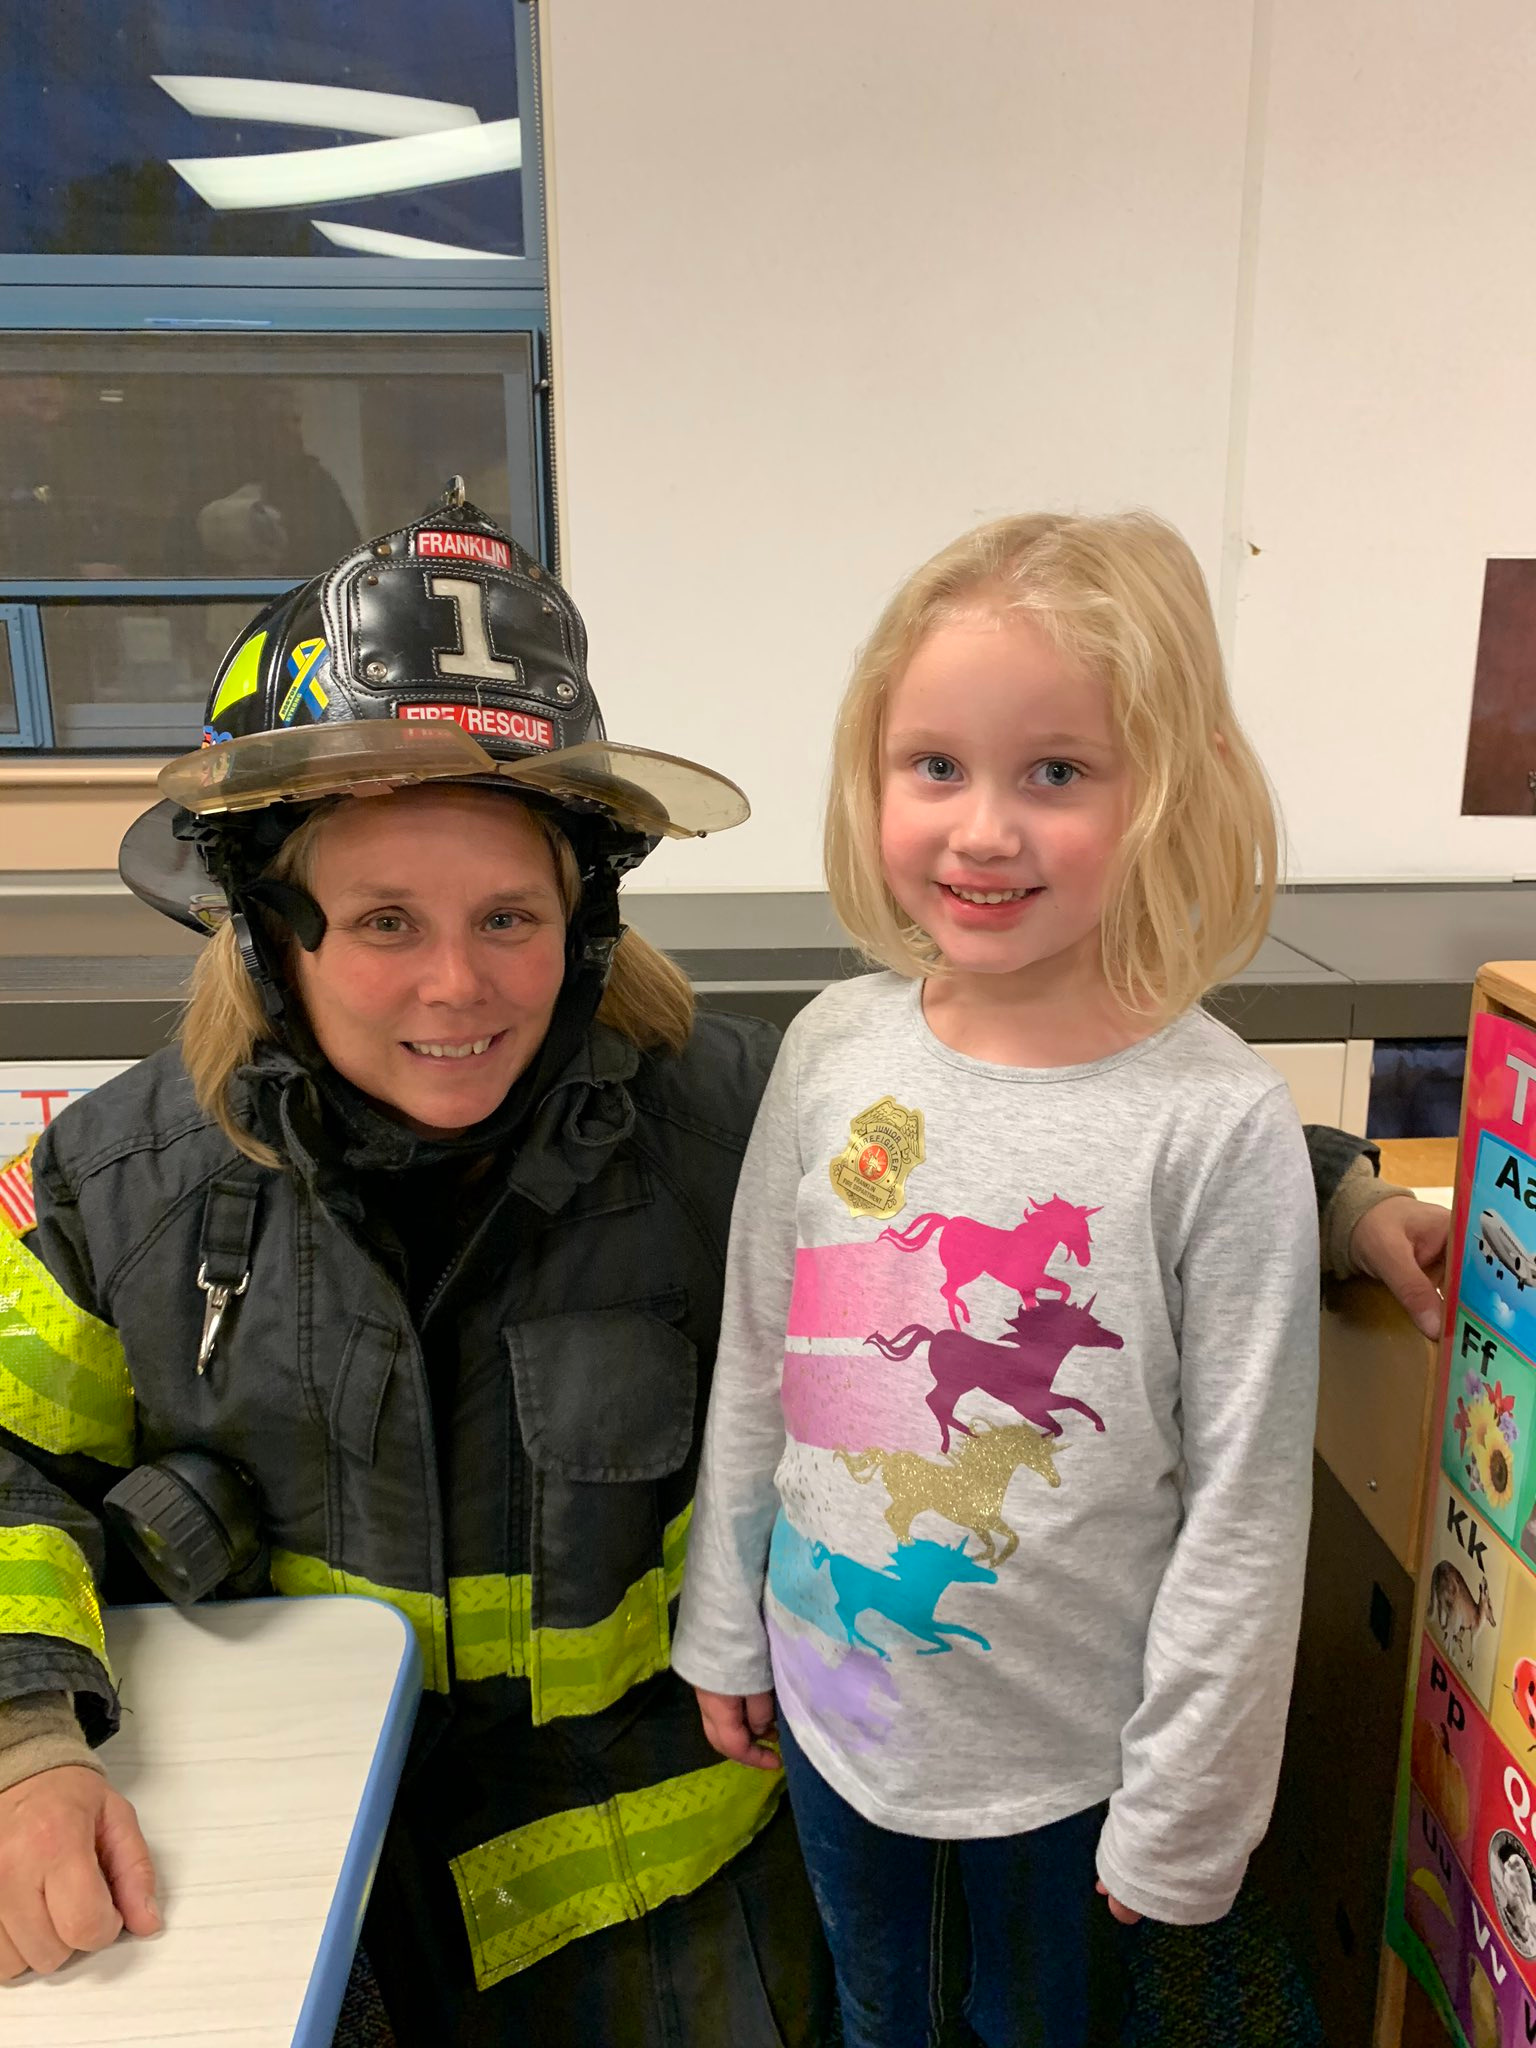 Firefighter with child